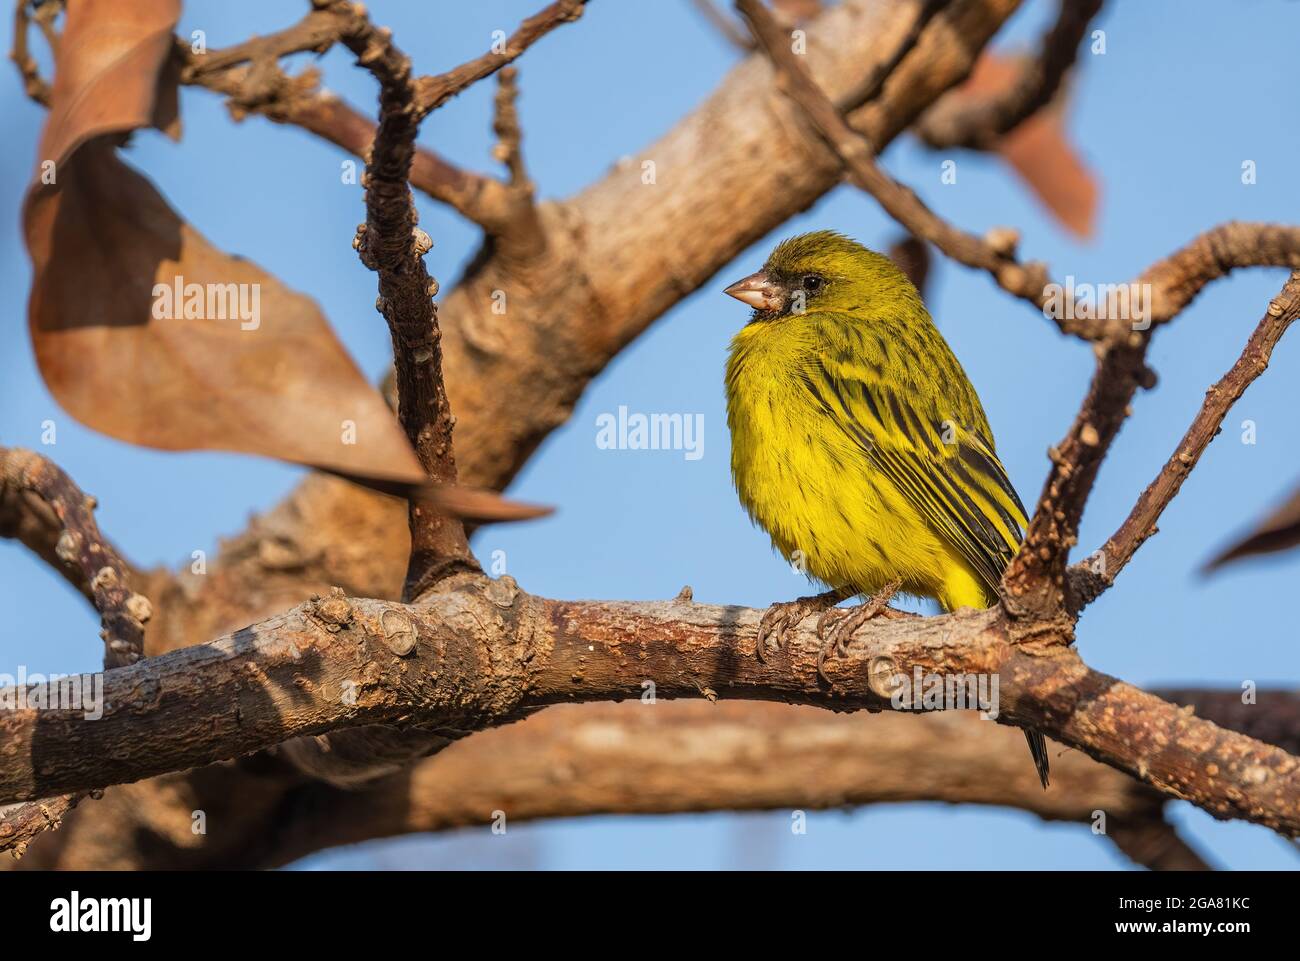 African Citril - Crithagra citrinelloides, beautiful perching bird from African bushes and grasslands, lake Ziway, Ethiopia. Stock Photo